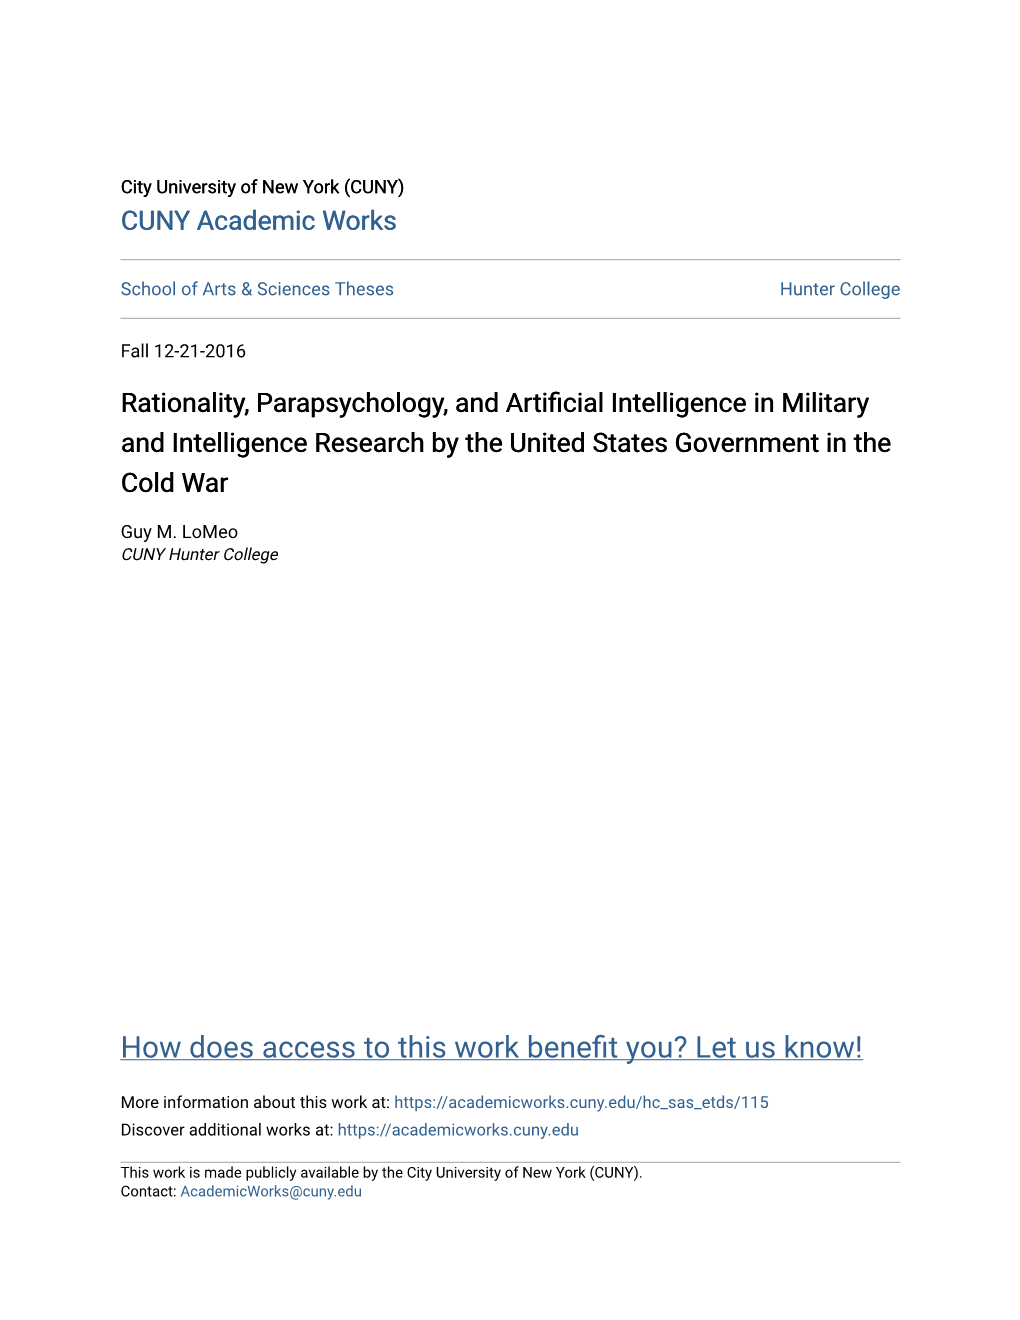 Rationality, Parapsychology, and Artificial Intelligence in Military and Intelligence Research by the United States Government in the Cold War